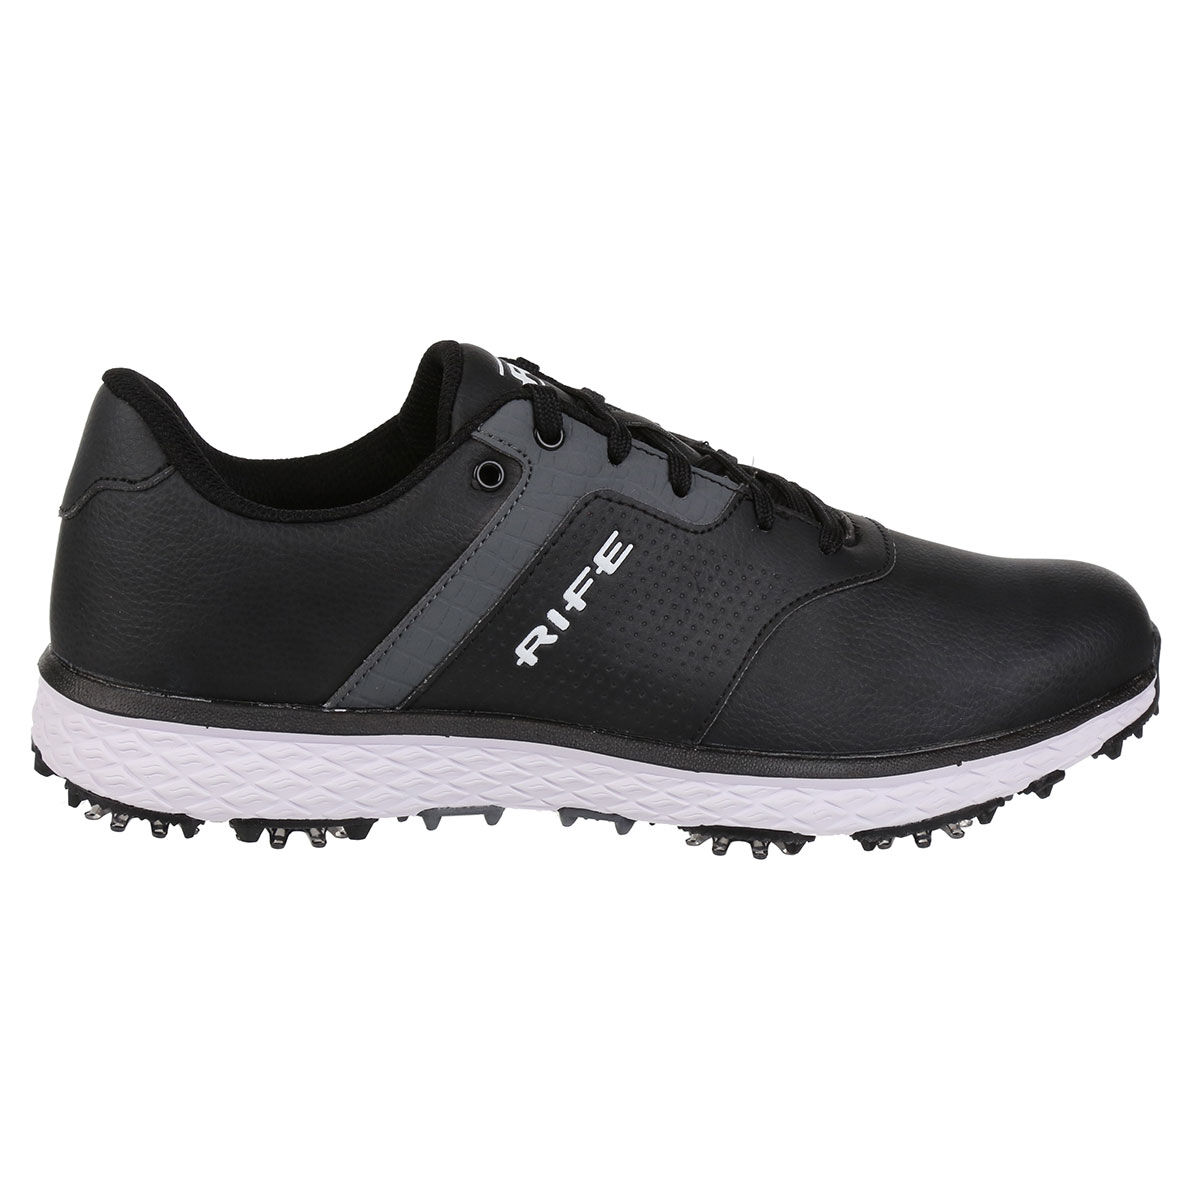 Rife Black and Grey Stylish Striped Lightning Waterproof Spiked Golf Shoes, Size: 9 | American Golf